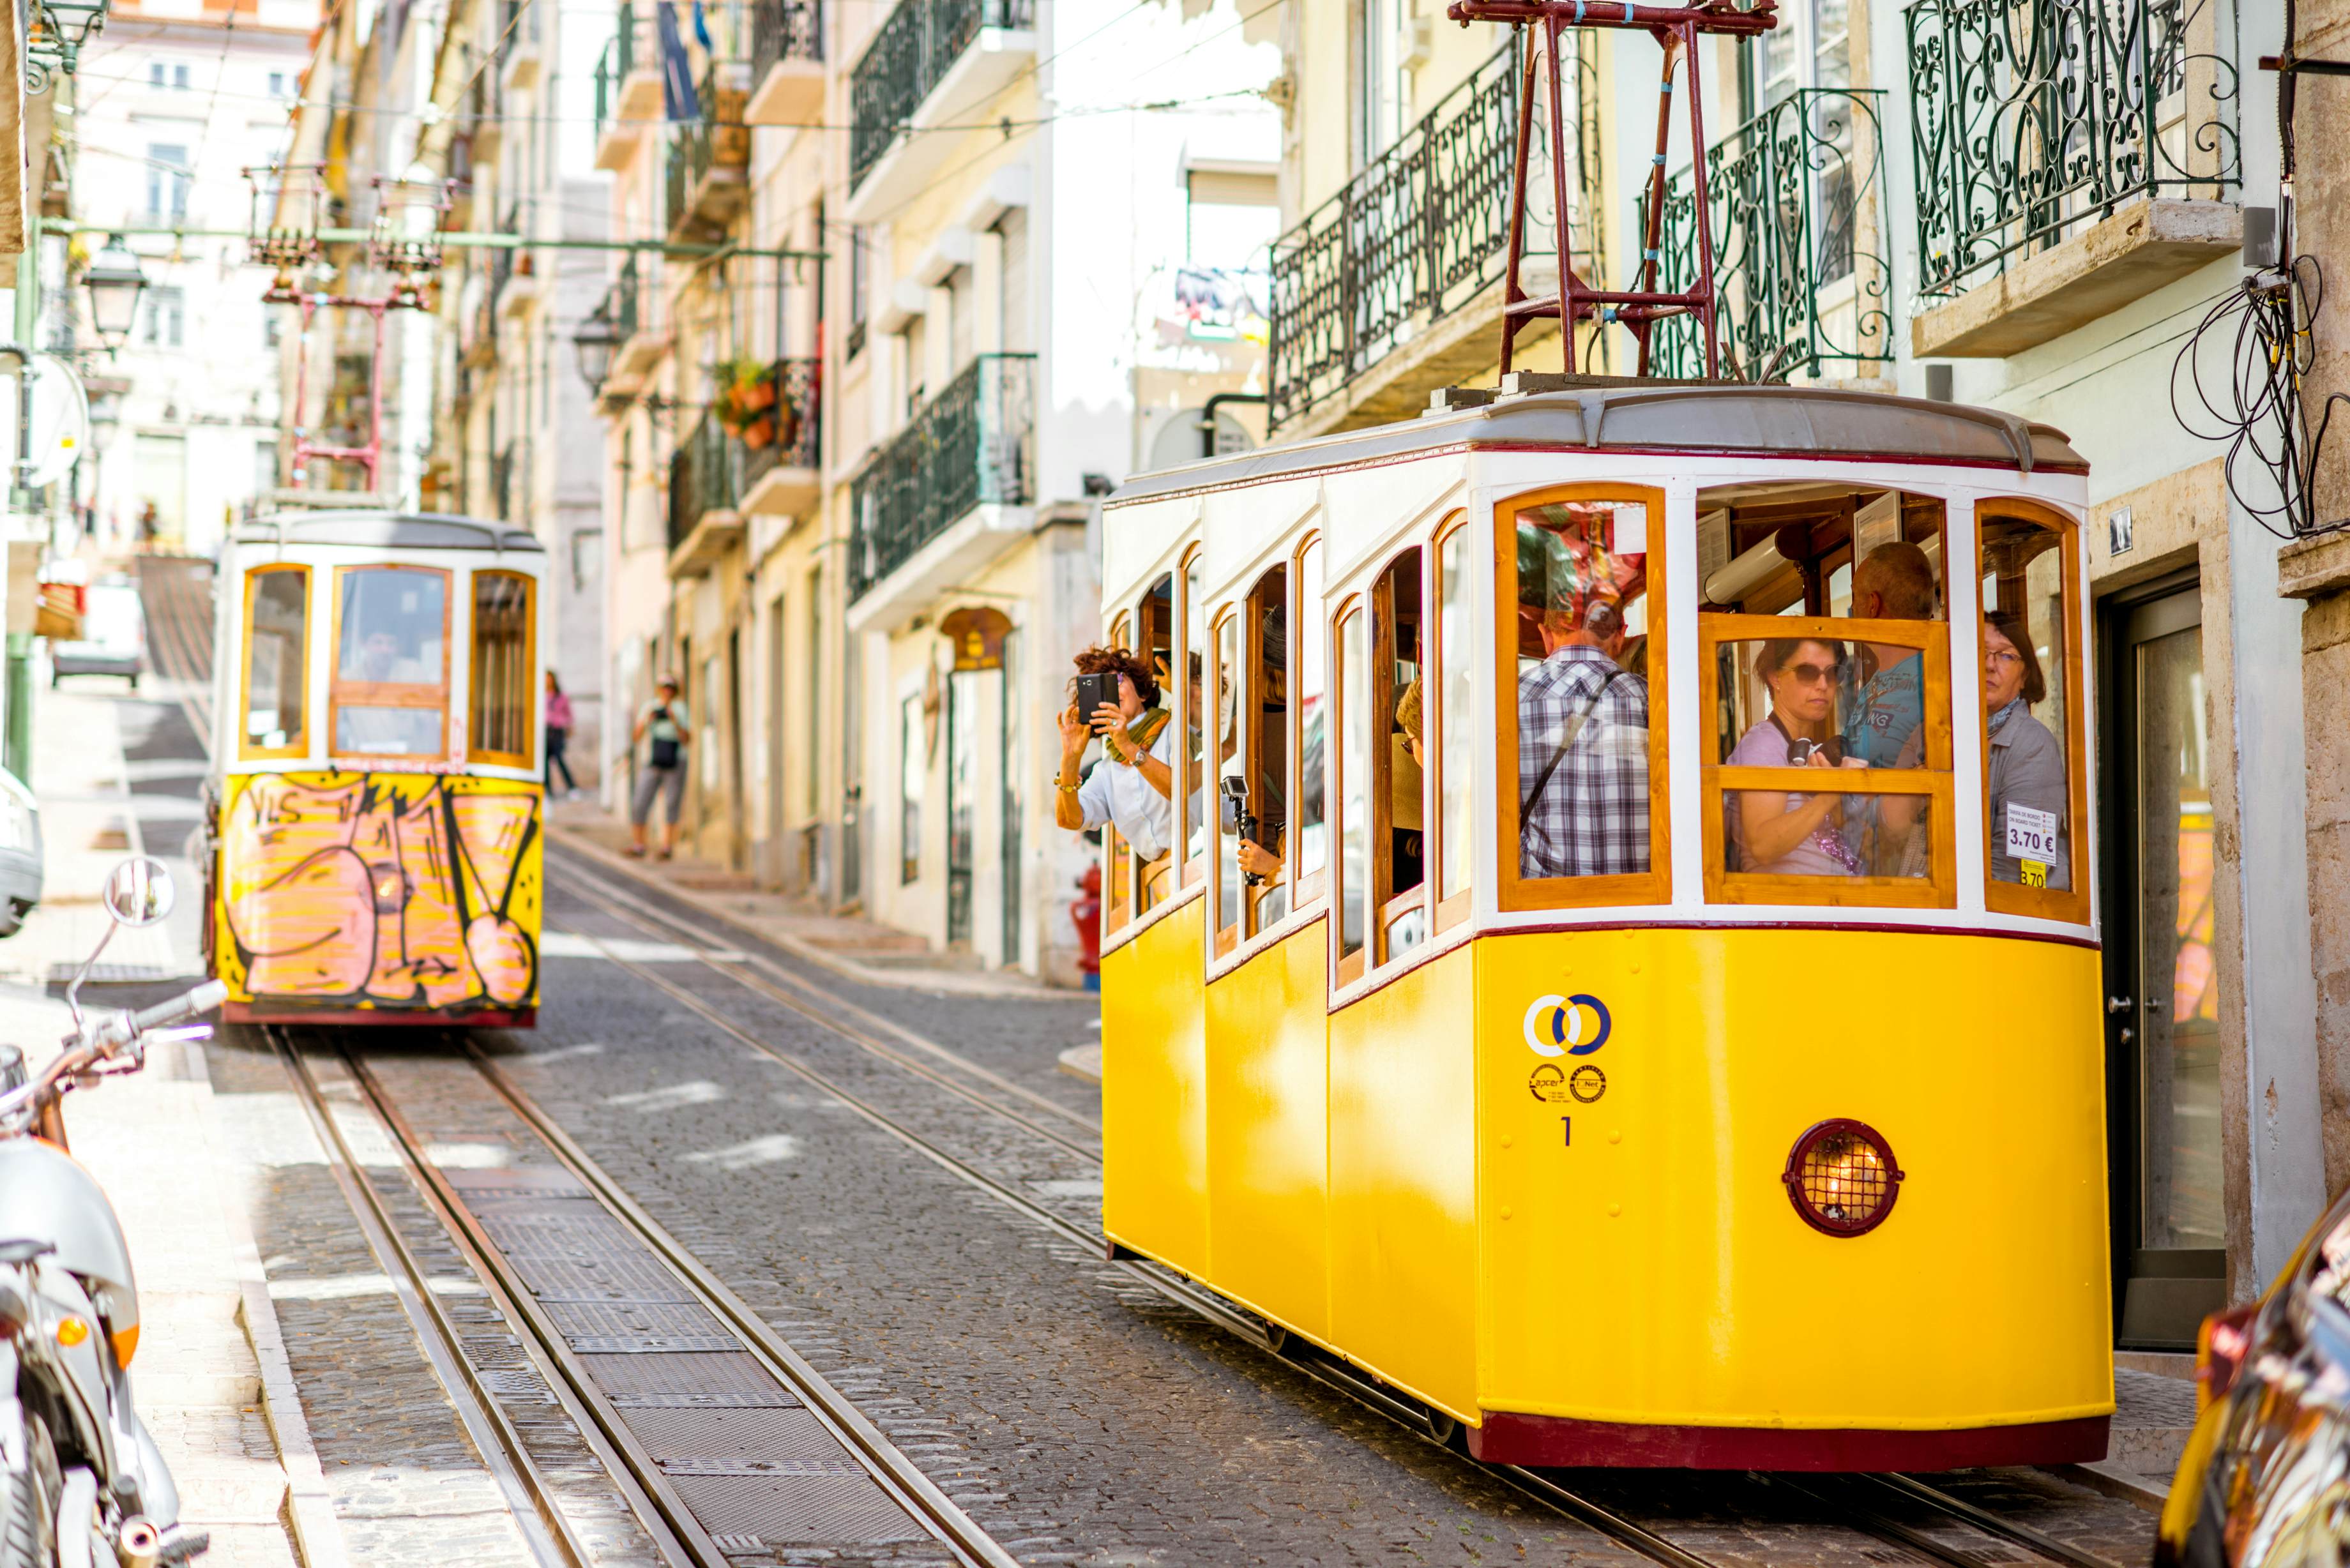 Lisbon's iconic yellow trams navigating the charming streets, perfect for a successful getaway in Portugal's vibrant capital.